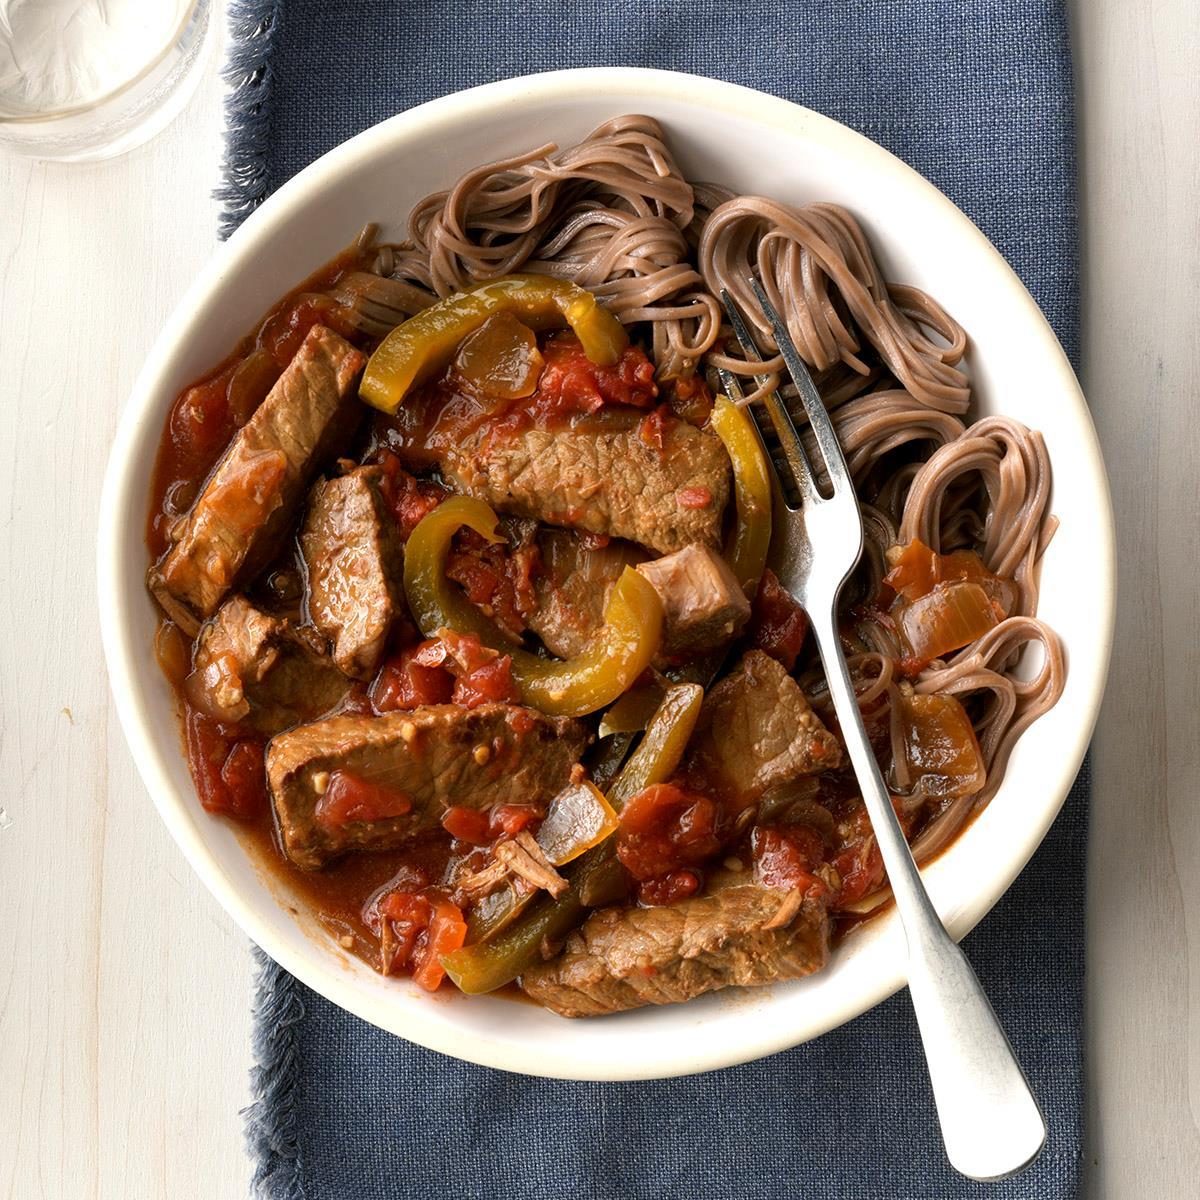 favourite slow cooker recipes - Slow-cooked pepper steak